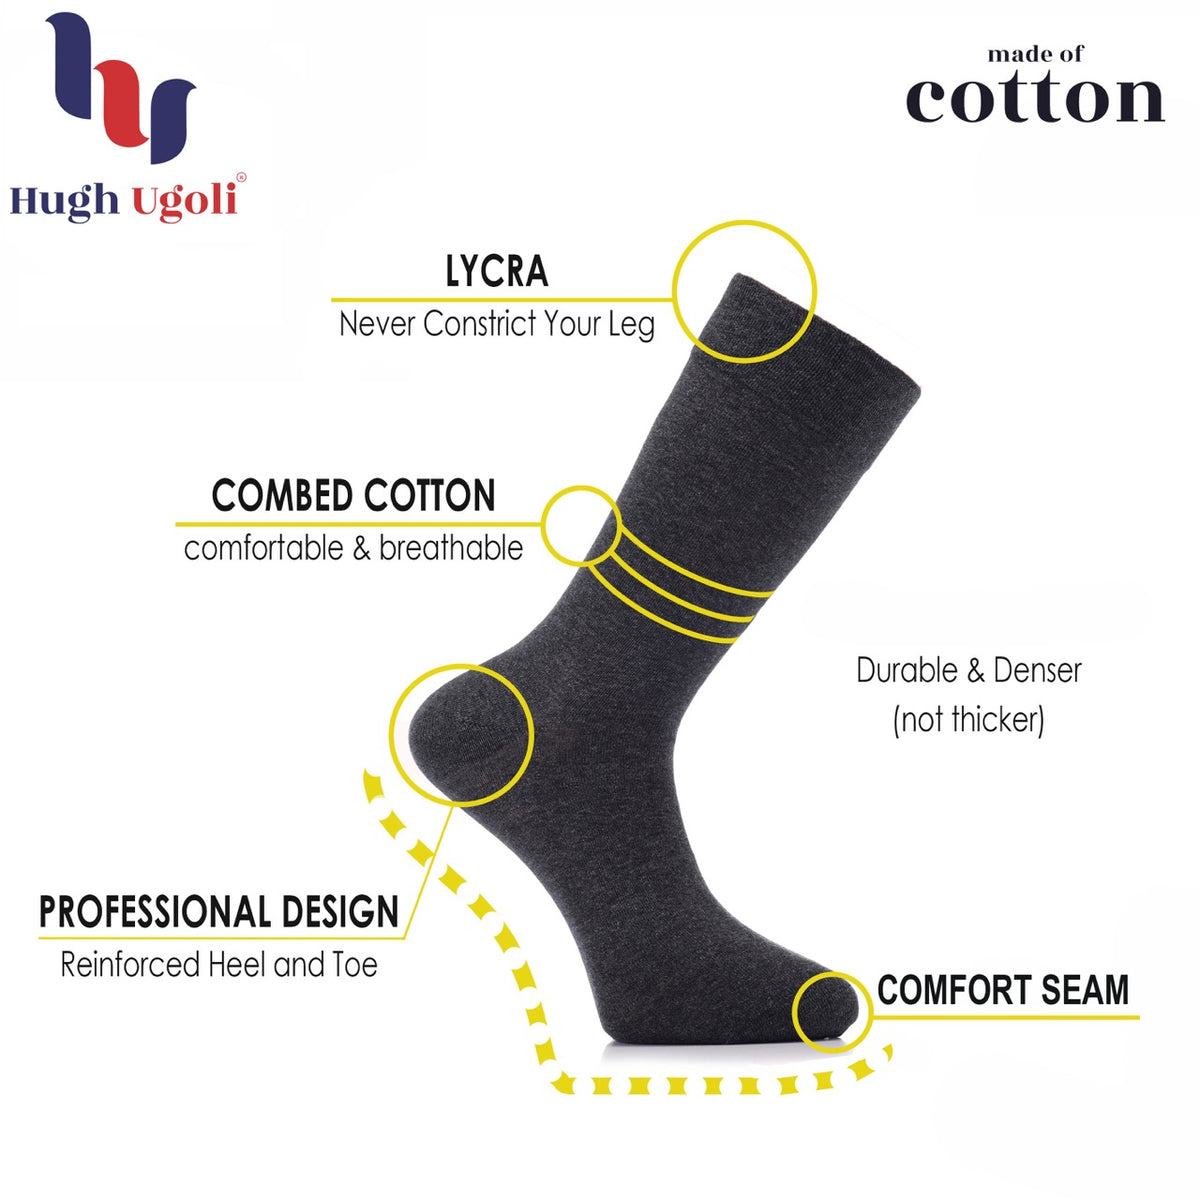 This image depicts the features of a pair of Cotton Crew Socks, including ribbed cuffs, reinforced heels and toes, and a comfortable fit.